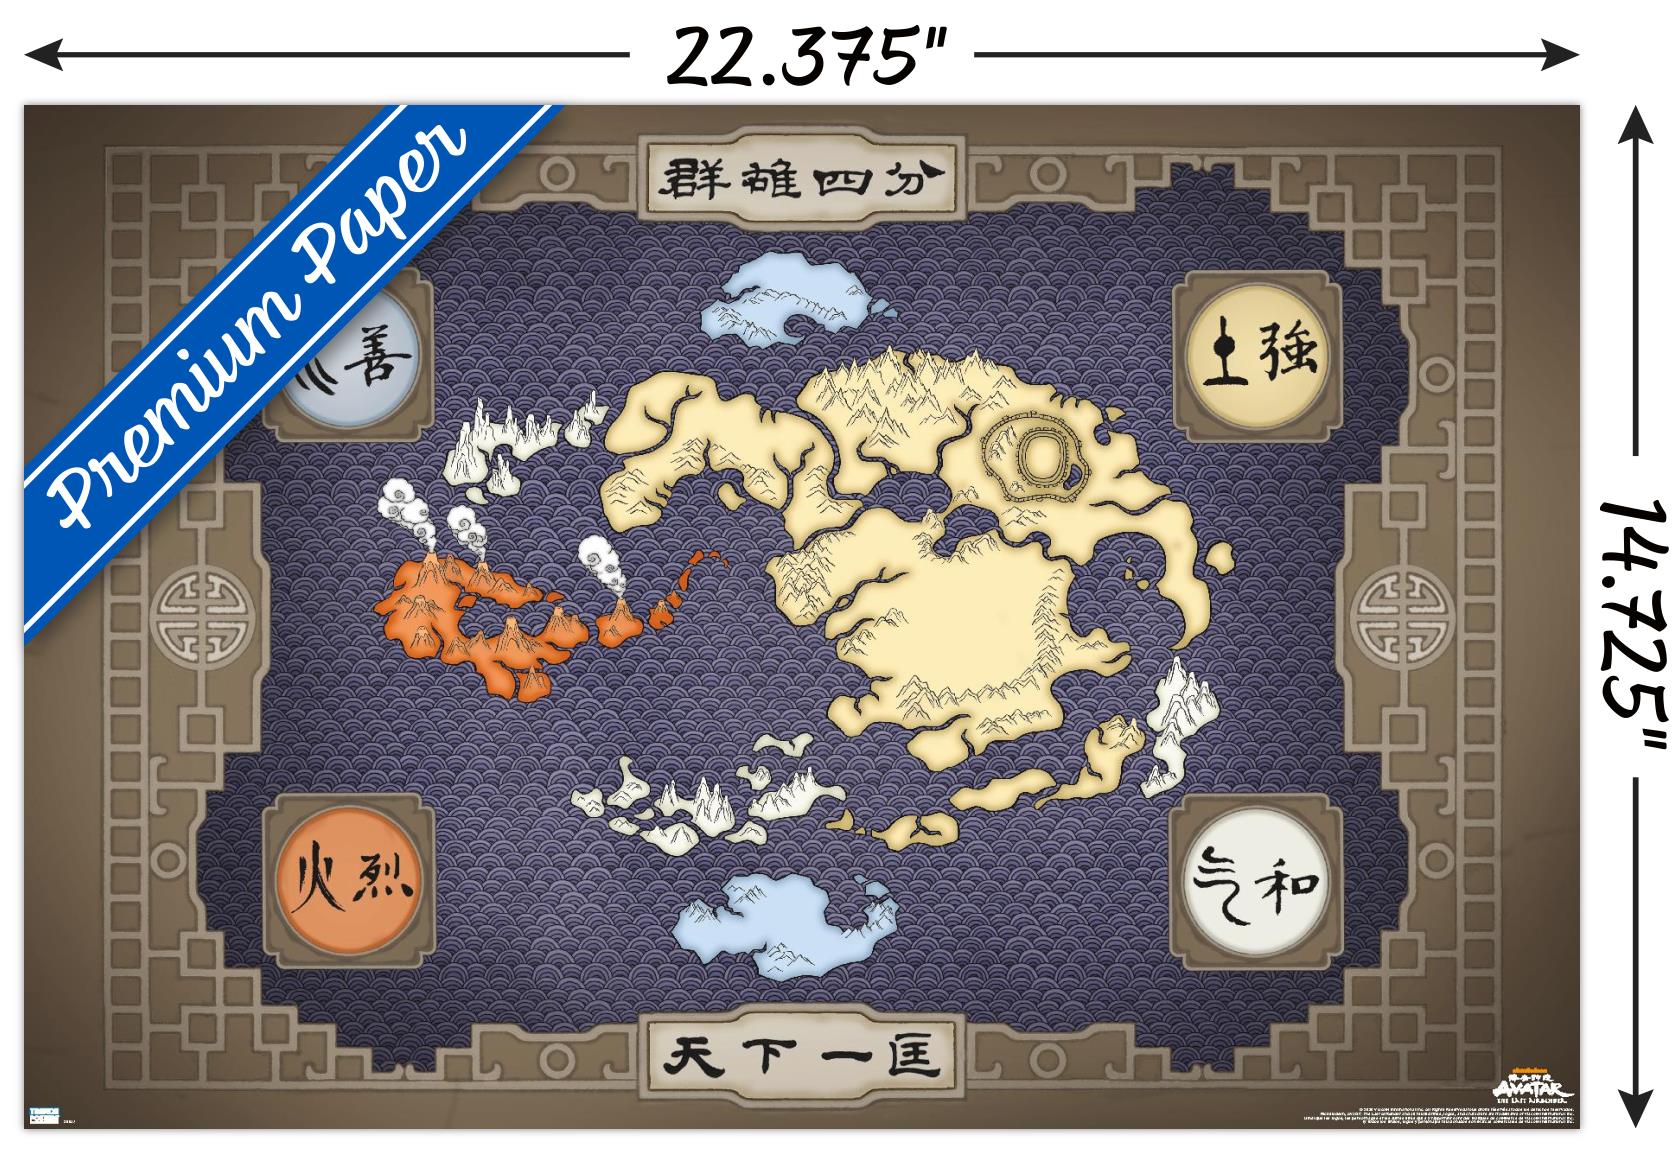 Avatar - Map Wall Poster, 14.725" x 22.375" - image 3 of 6